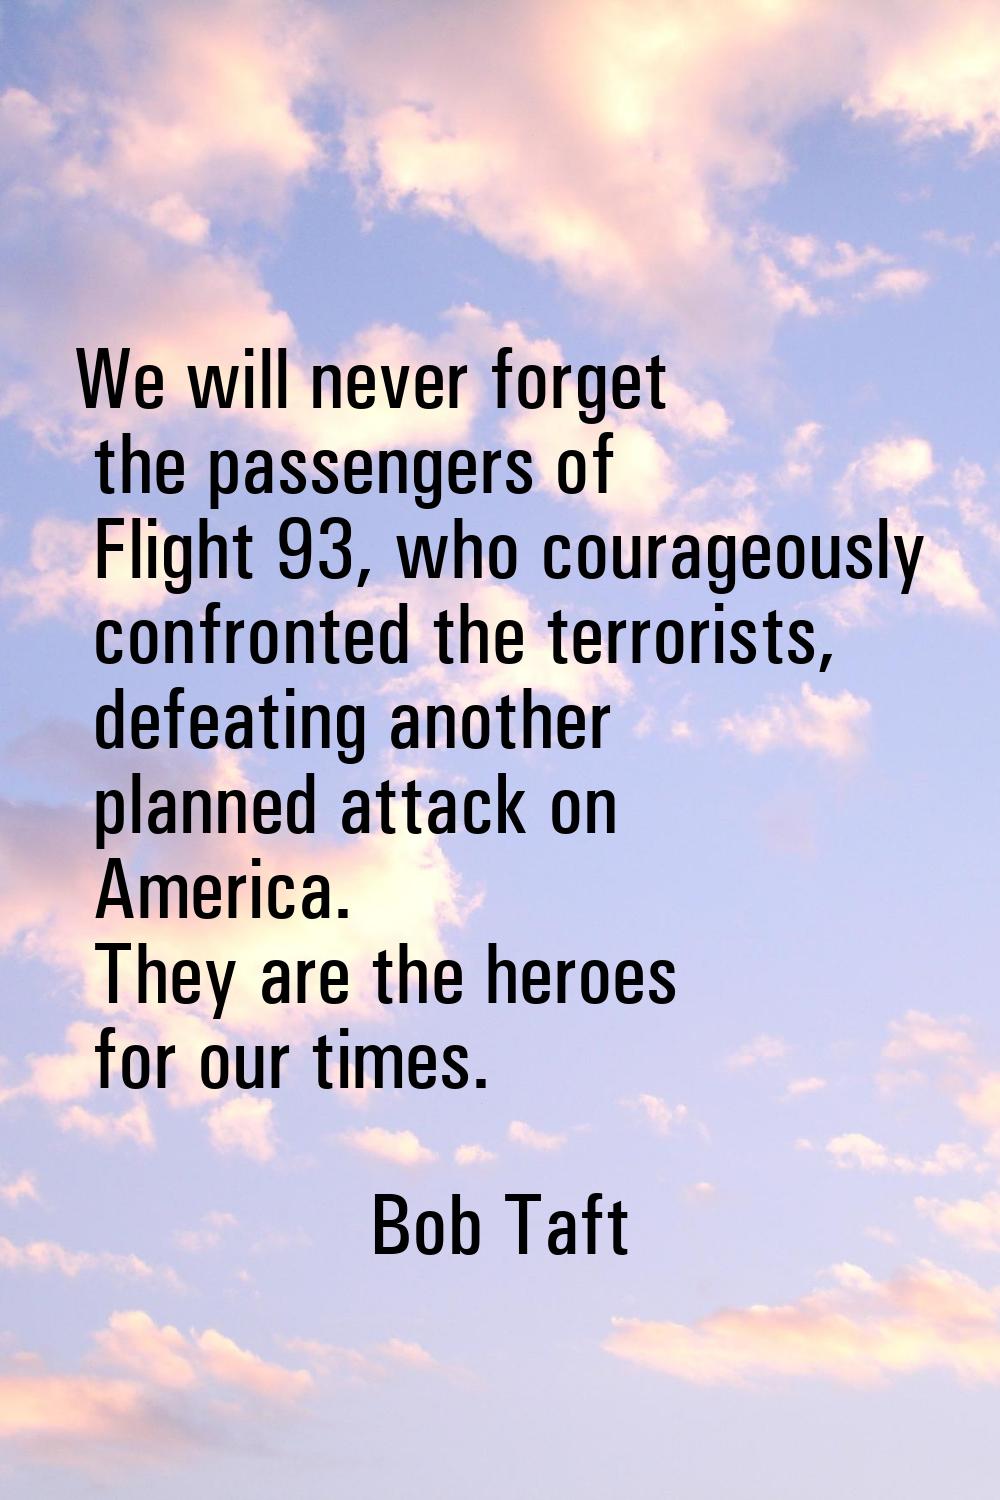 We will never forget the passengers of Flight 93, who courageously confronted the terrorists, defea